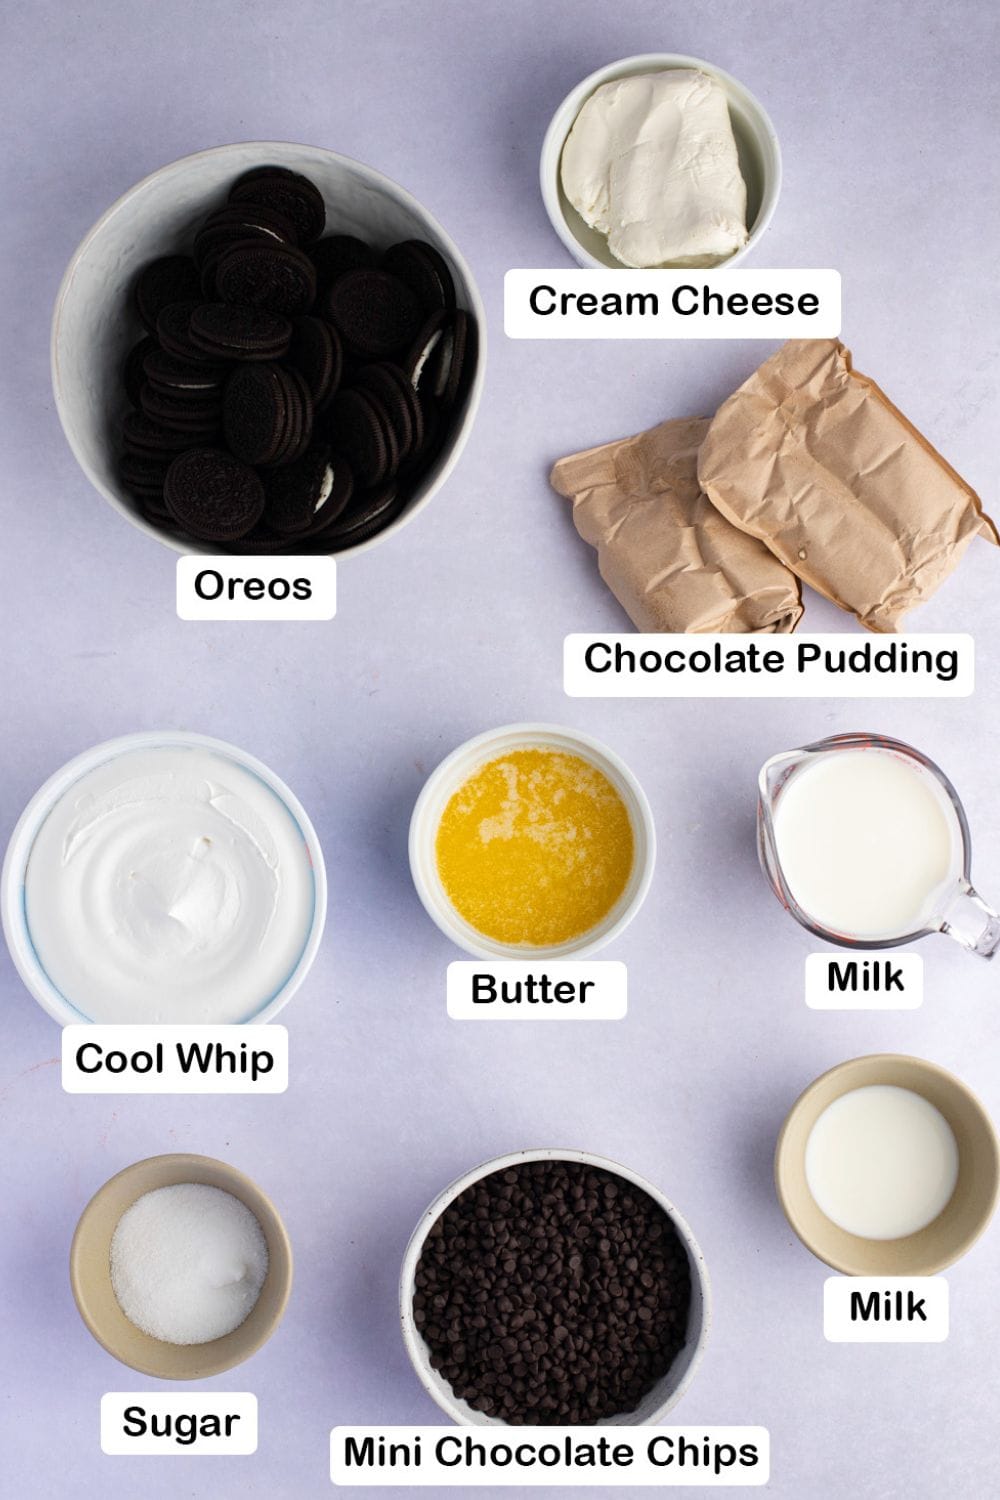 Oreo Lasagna Ingredients: Oreo, Cream Cheese, Cool Whip, Butter, Chocolate Pudding, Butter, Sugar, Chocolate Chips and Milk